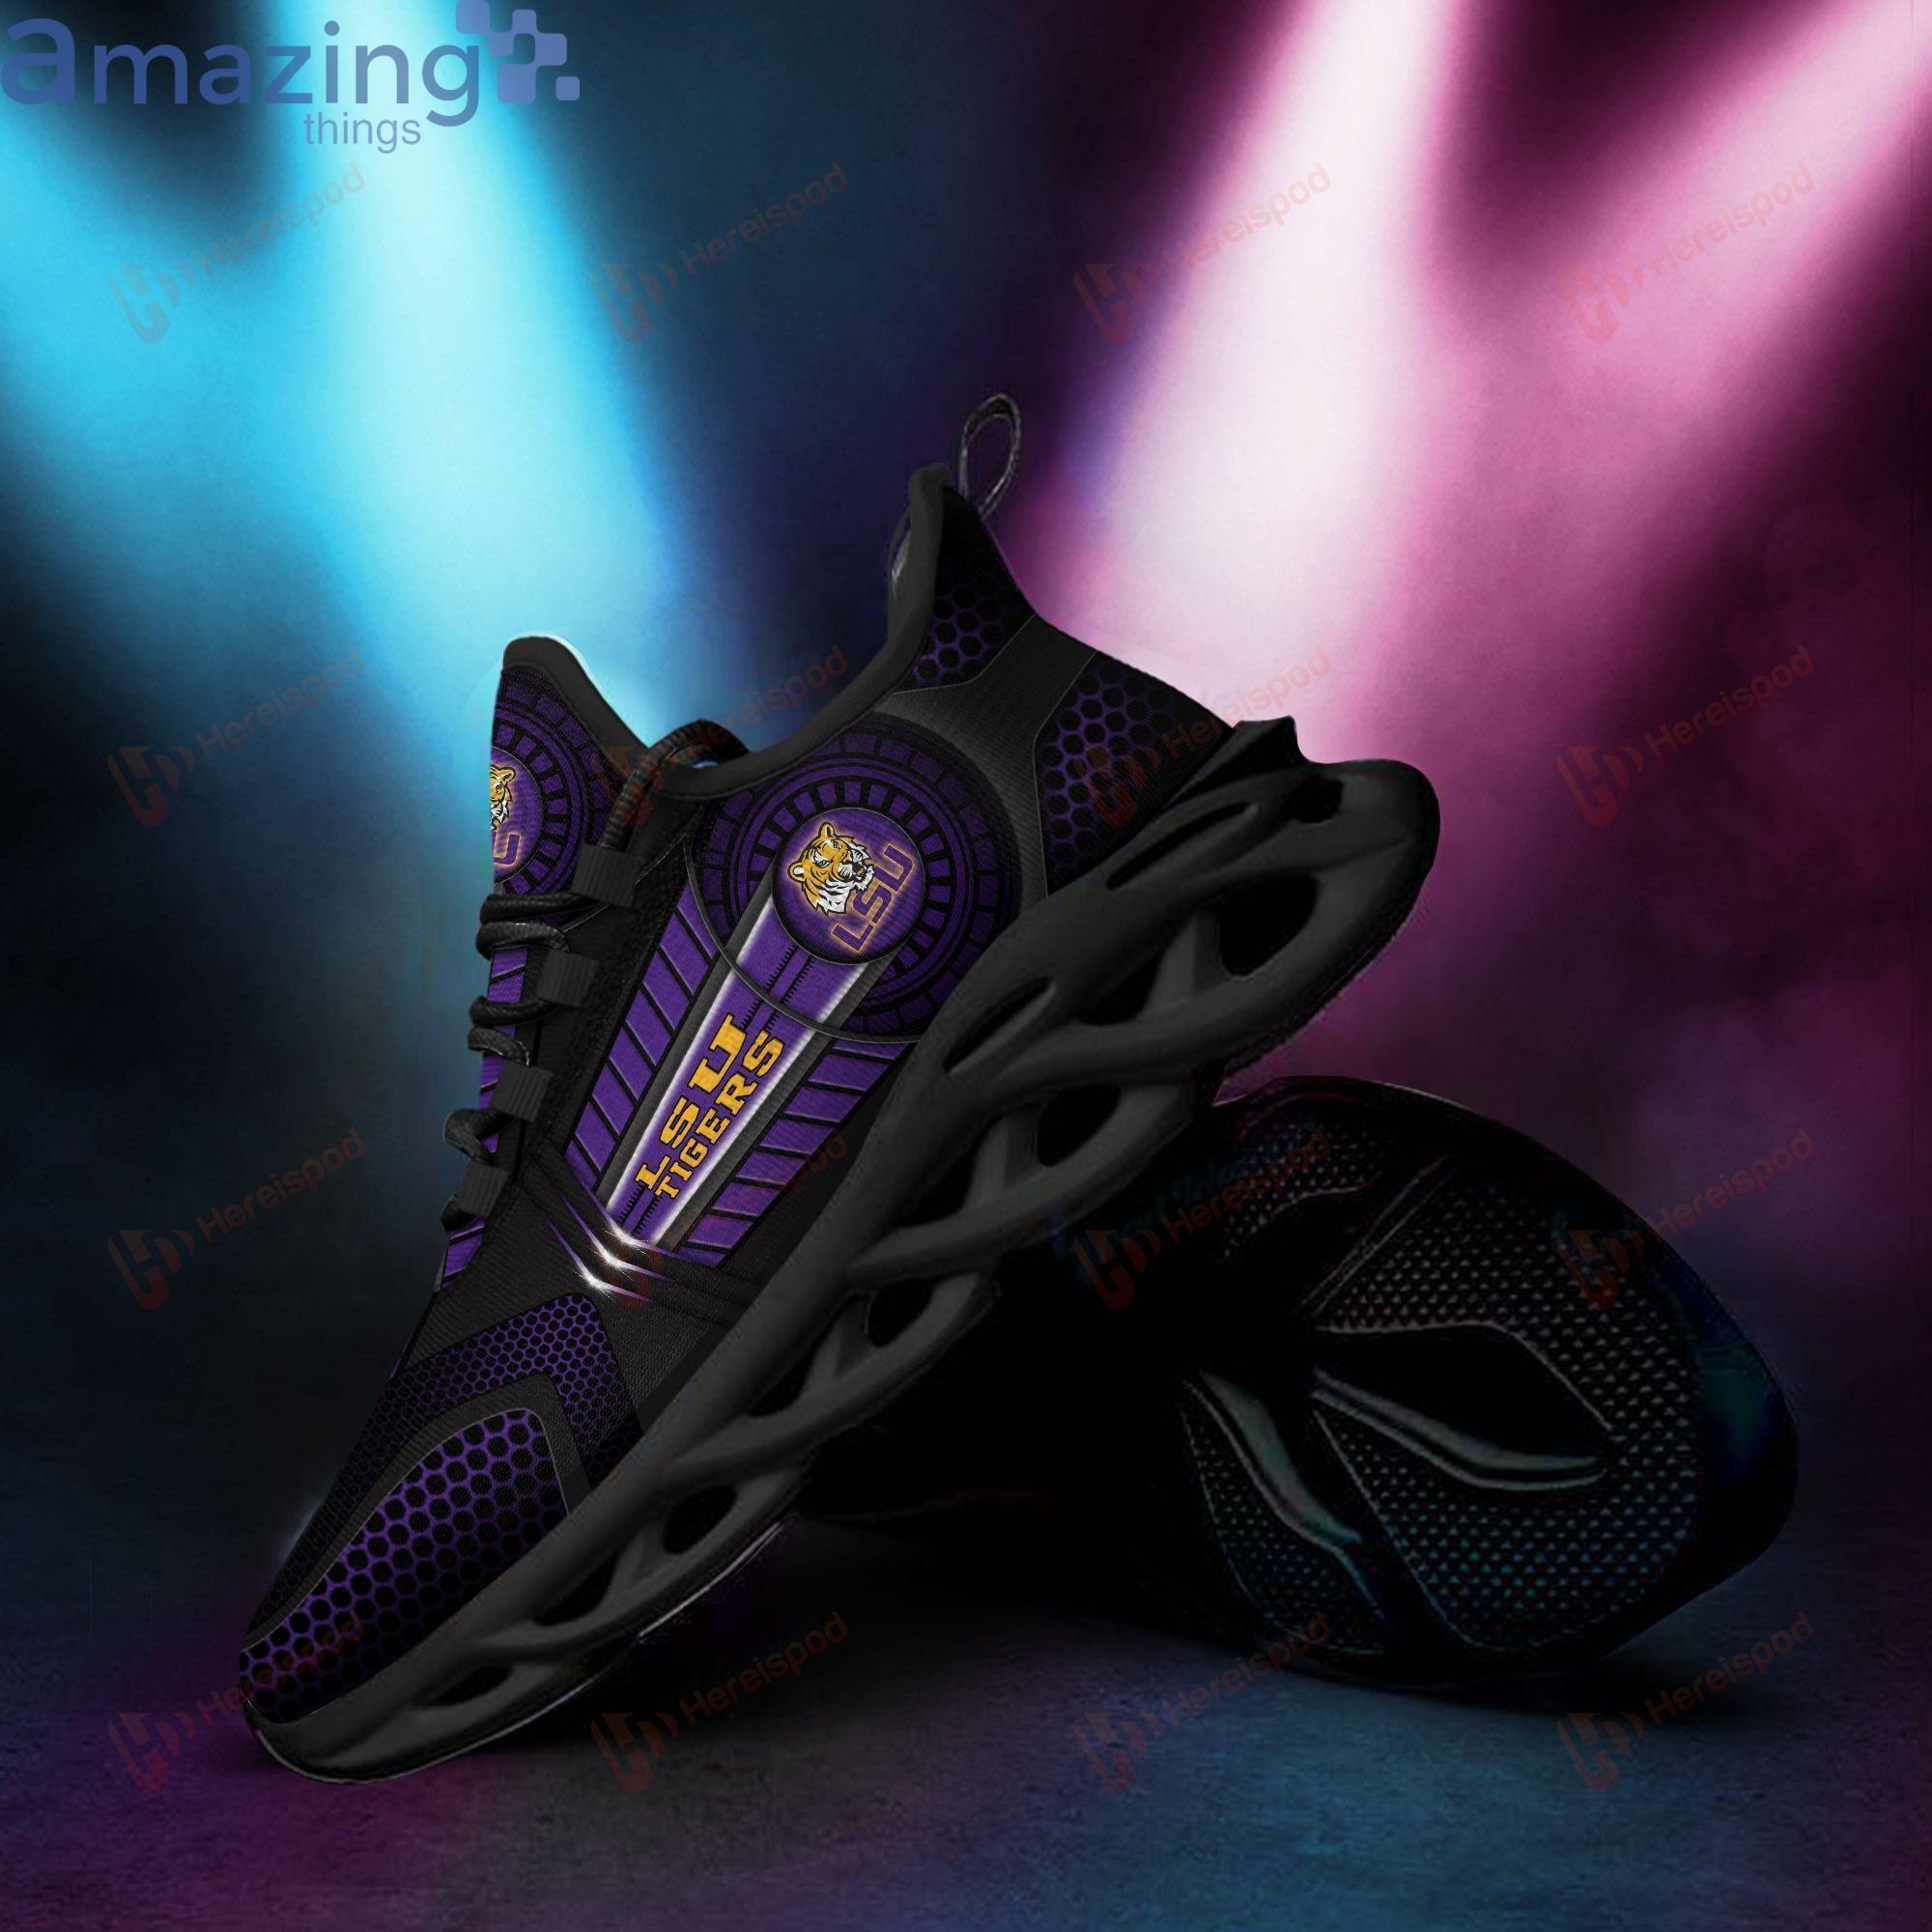 Lsu Tigers Max Soul Sneaker For Fans Product Photo 2